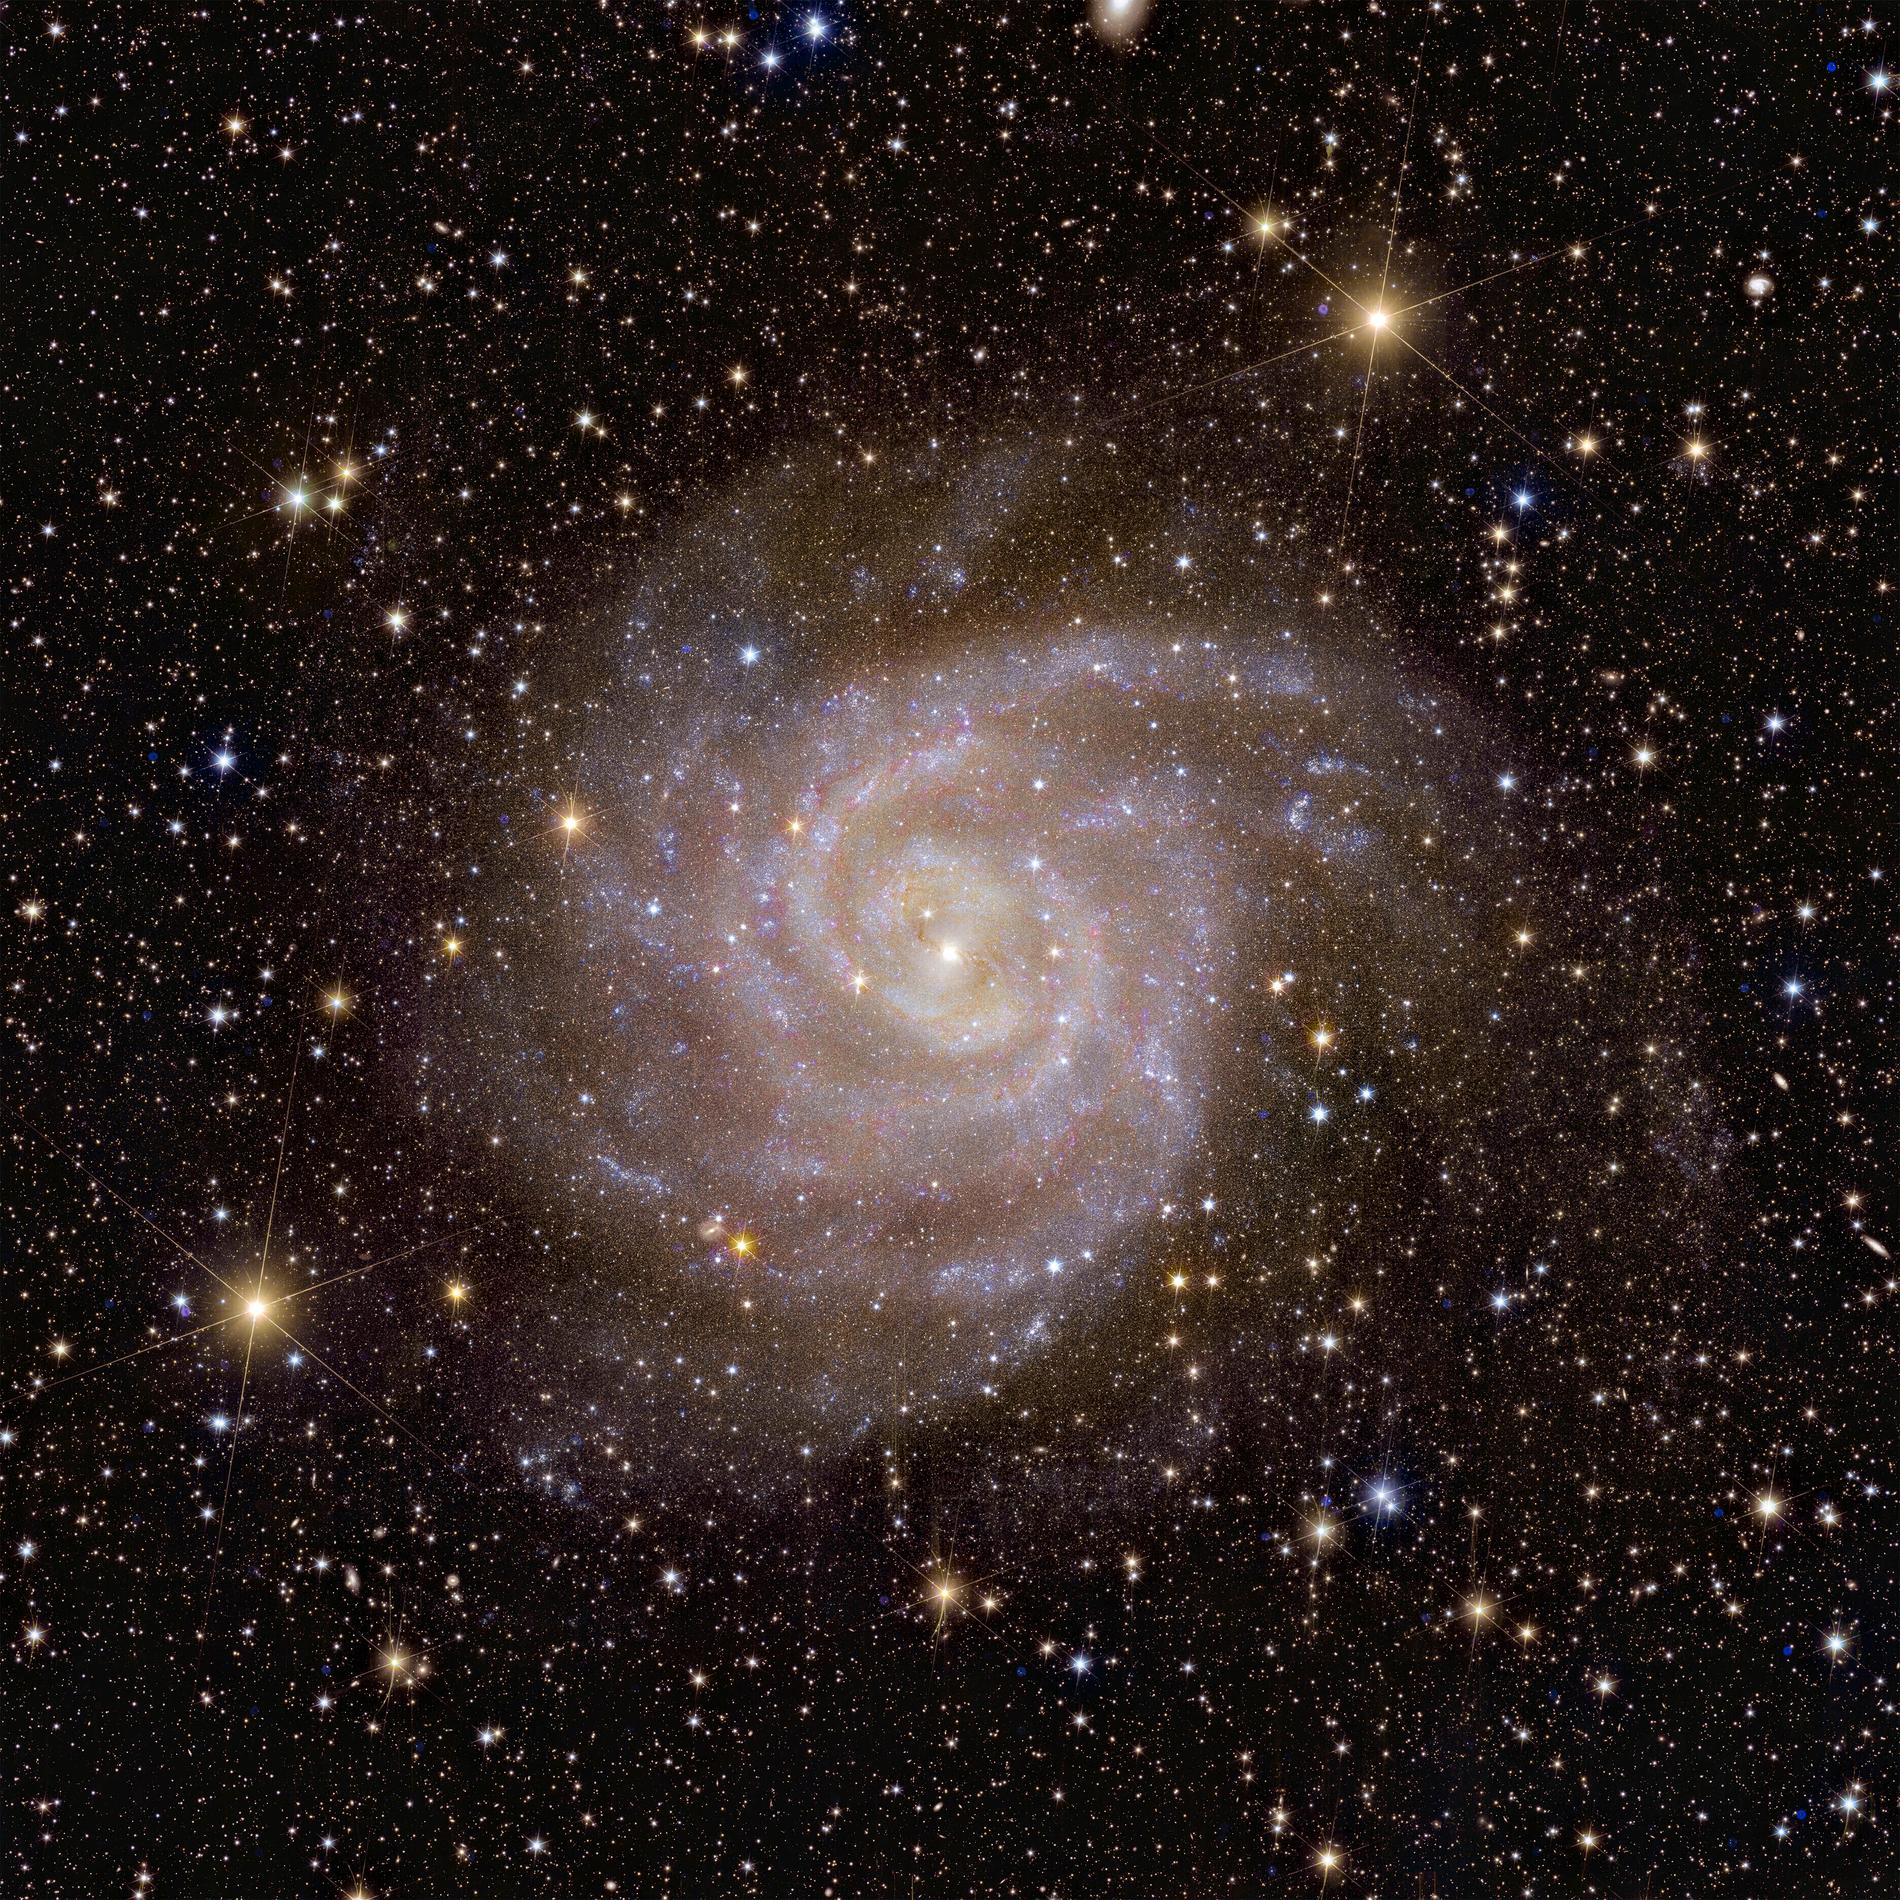 The image shows a galaxy called IC 342, taken by the European Euclid telescope in space. 